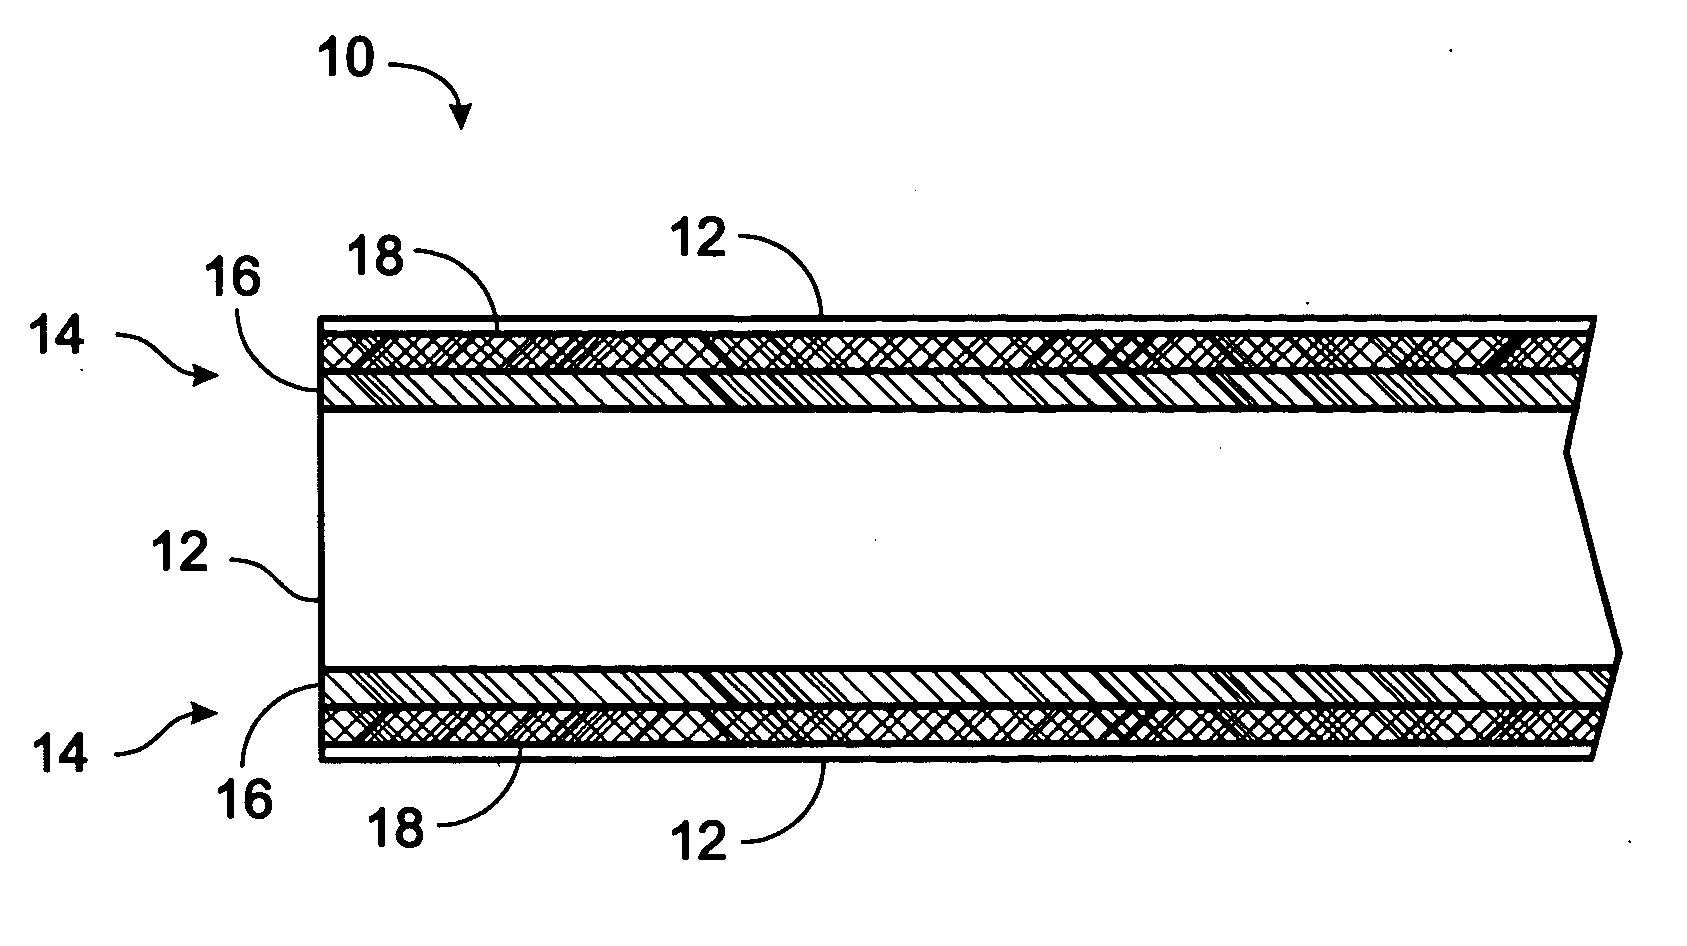 Fire-resistant panel and method of manufacture